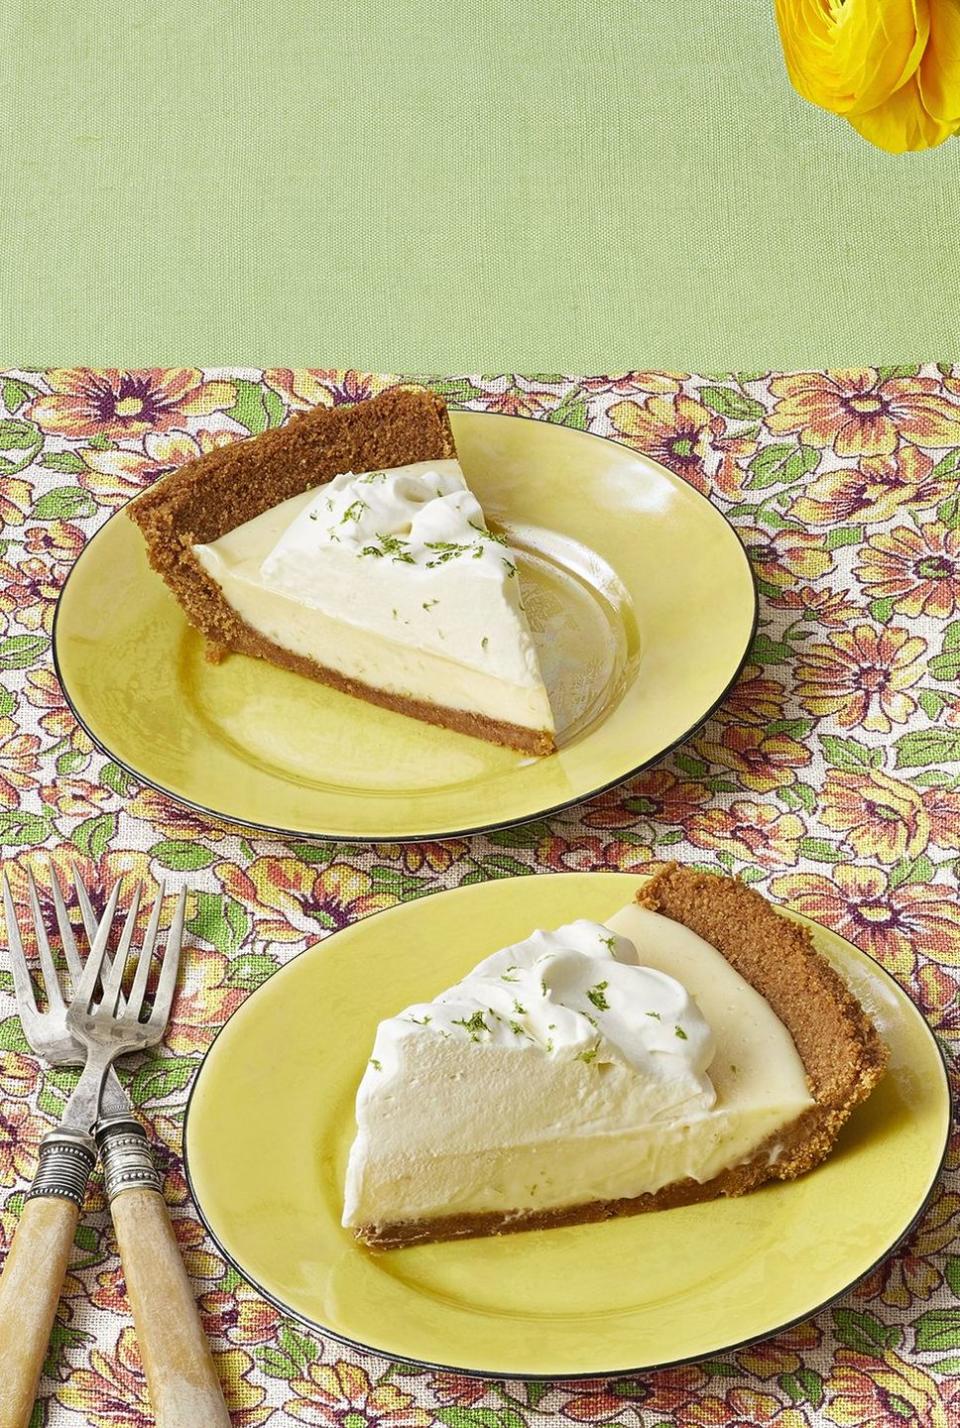 classic key lime pie slices on yellow plates